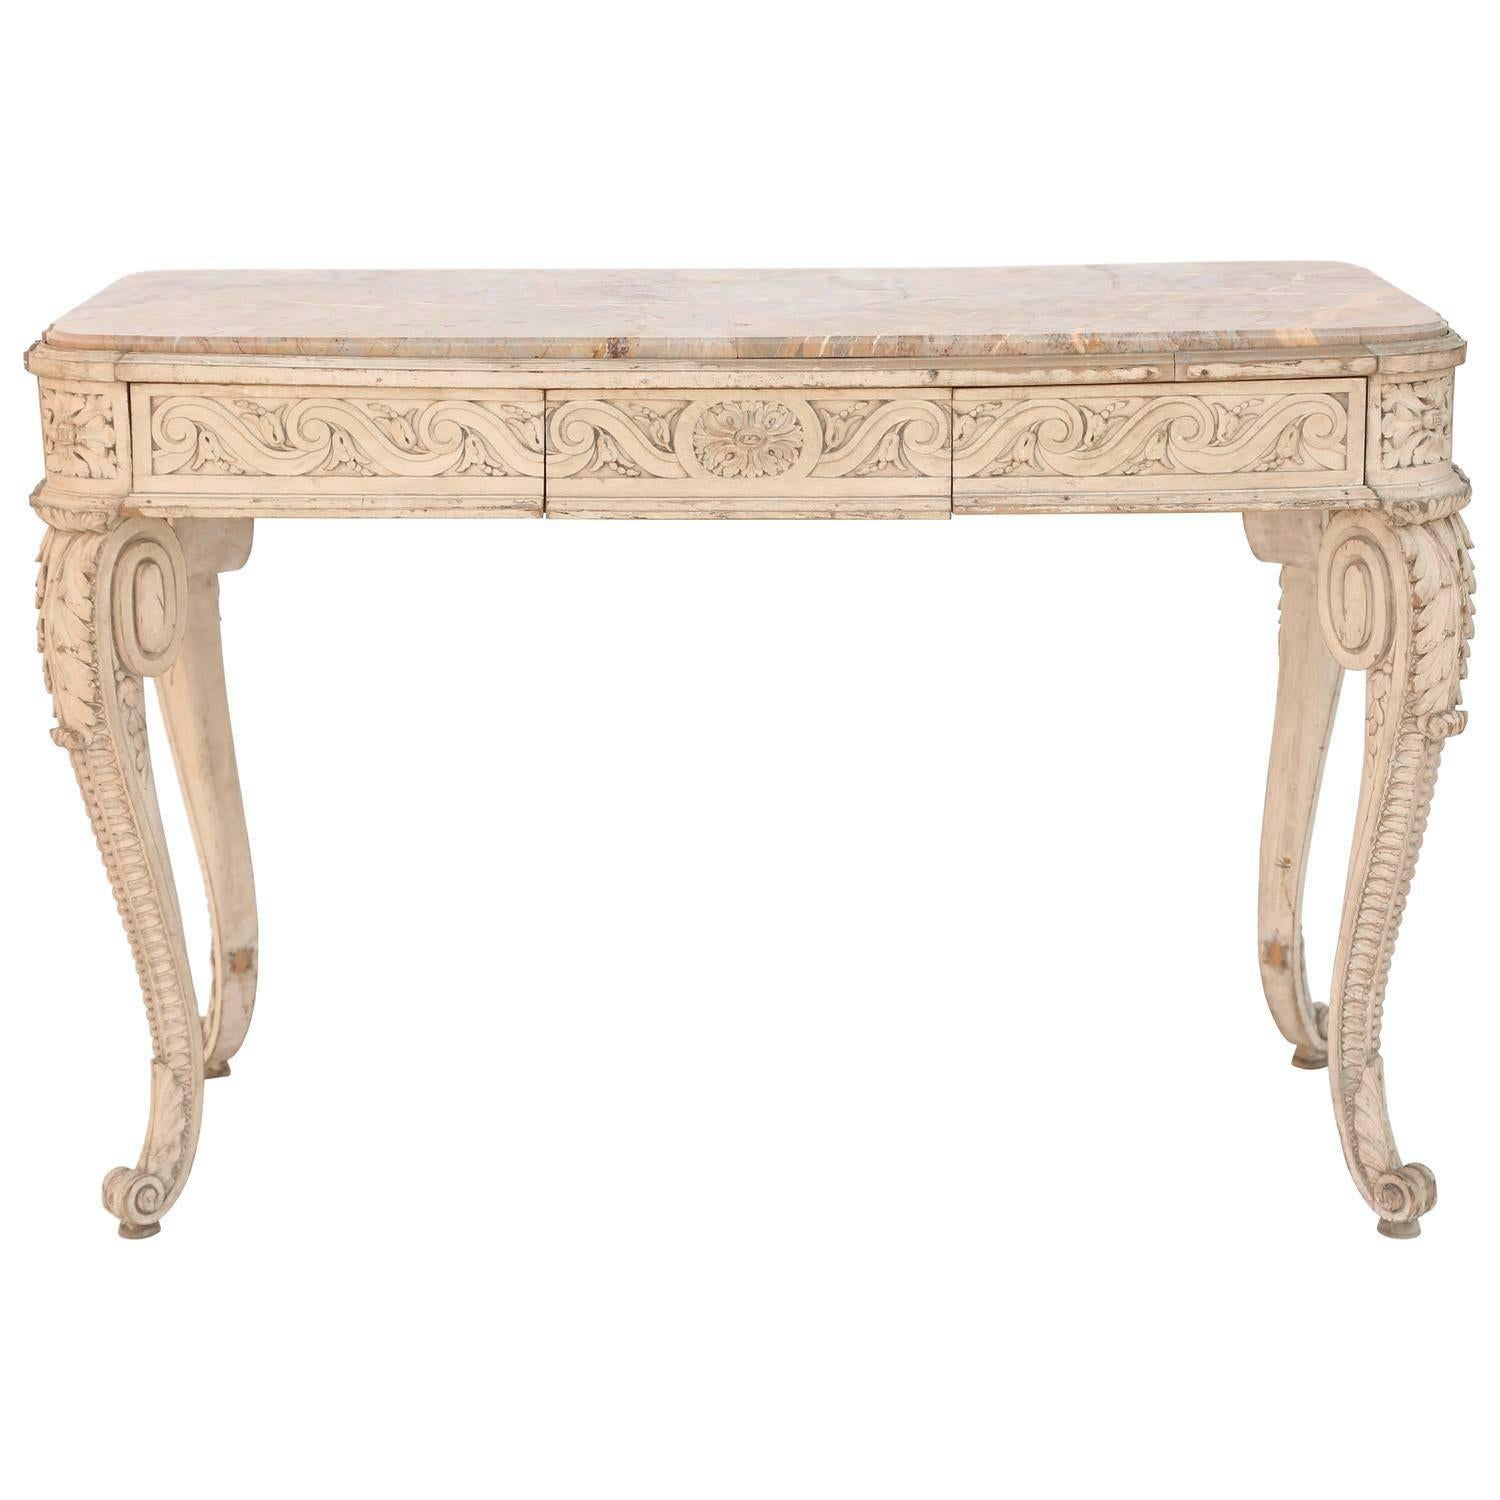 18th Century French Console or Centre Table with Mabre Napoleon Top